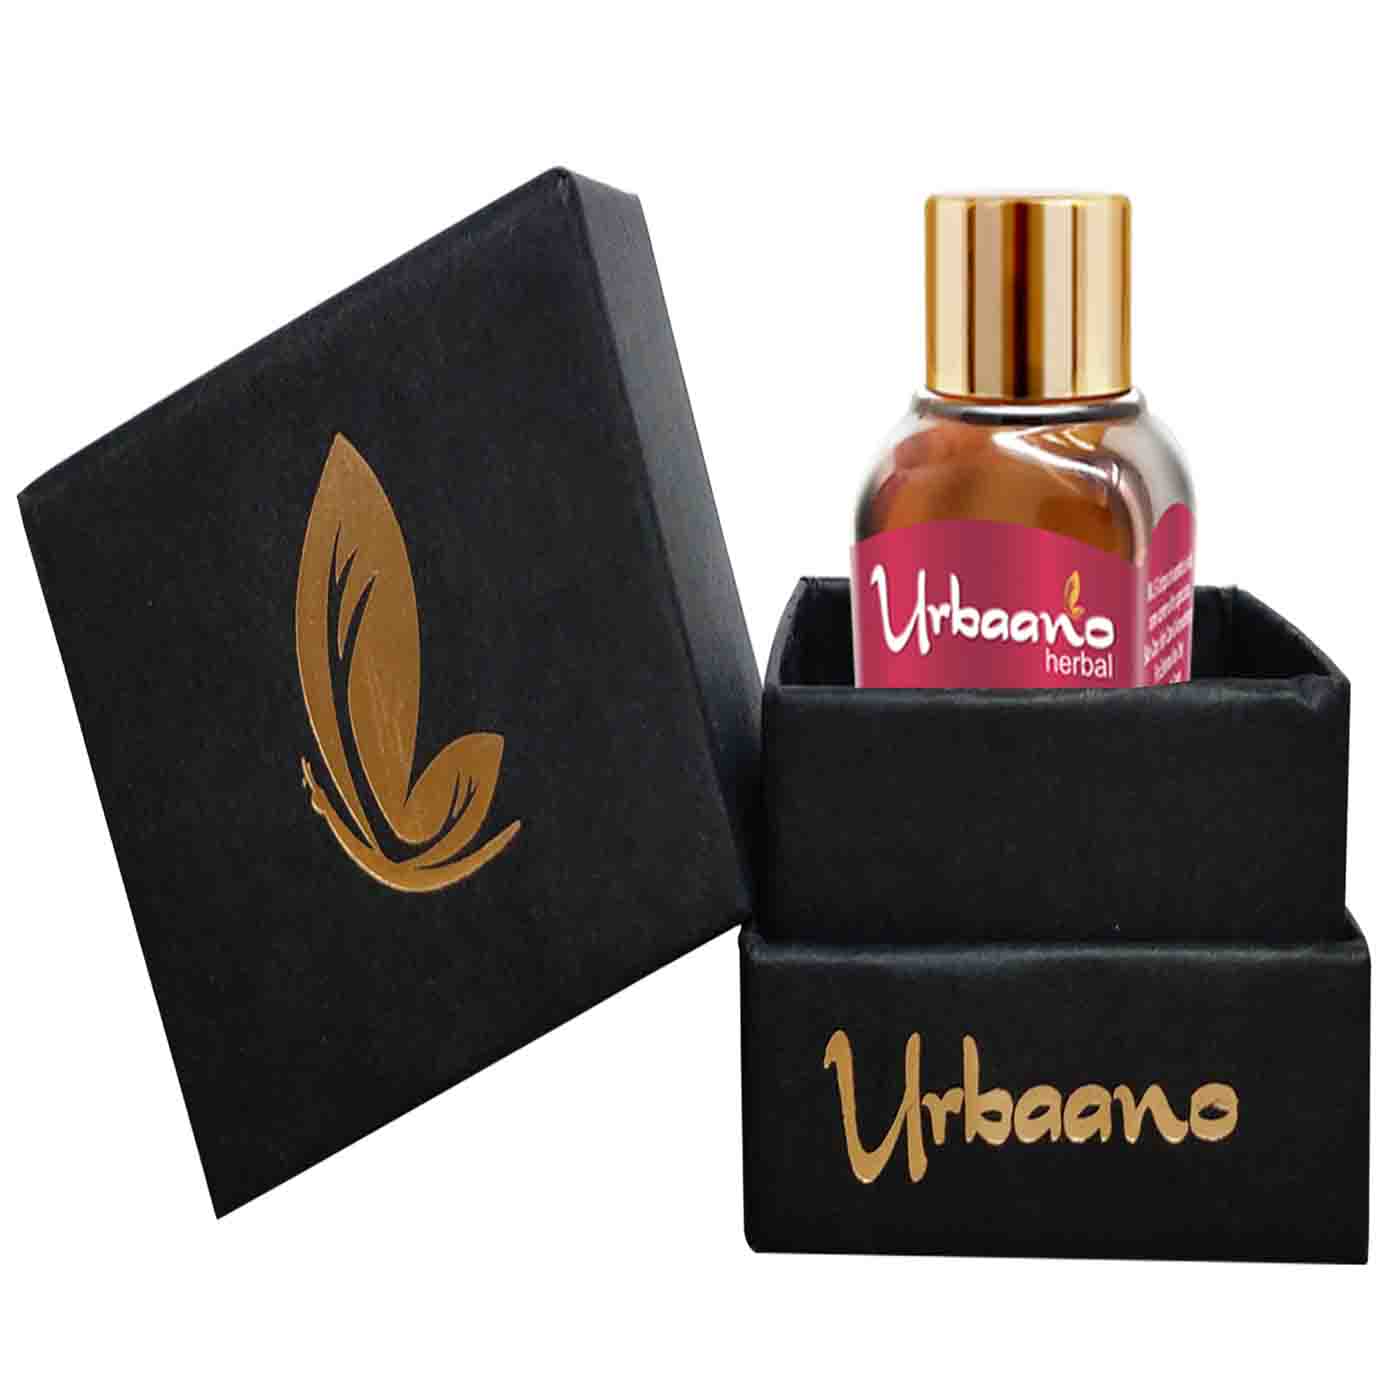 urbaano herbal rosehip essential oil, carrier oil, for skincare festive attractive gifting